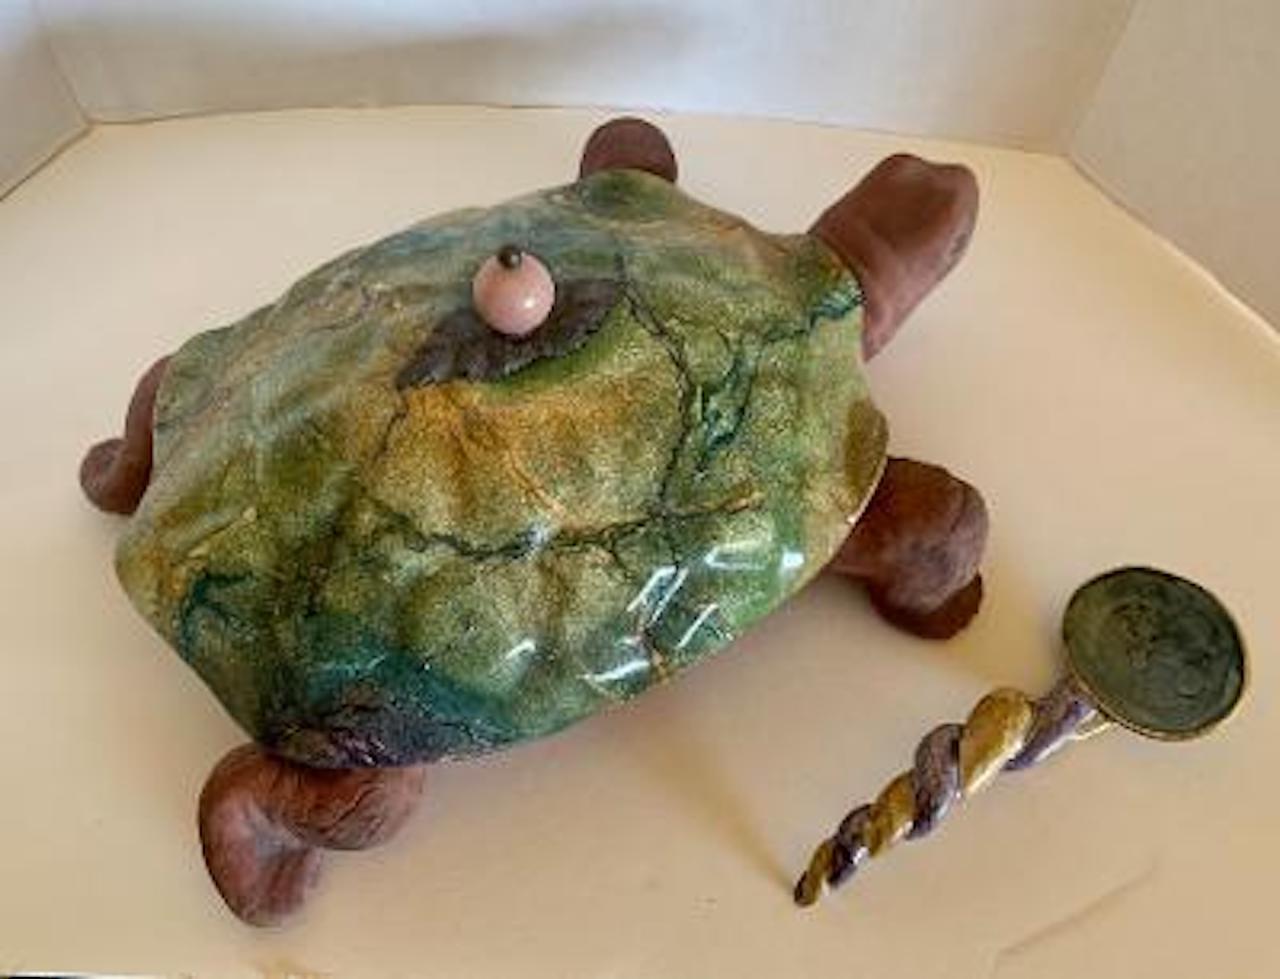 Very whimsical and imaginative, handmade and hand painted designer Mackenzie-Child’s richly textured and handsomely hand painted Majolica or earthenware three-piece turtle tureen style server with unique spoon that doubles as the turtle’s tail. The